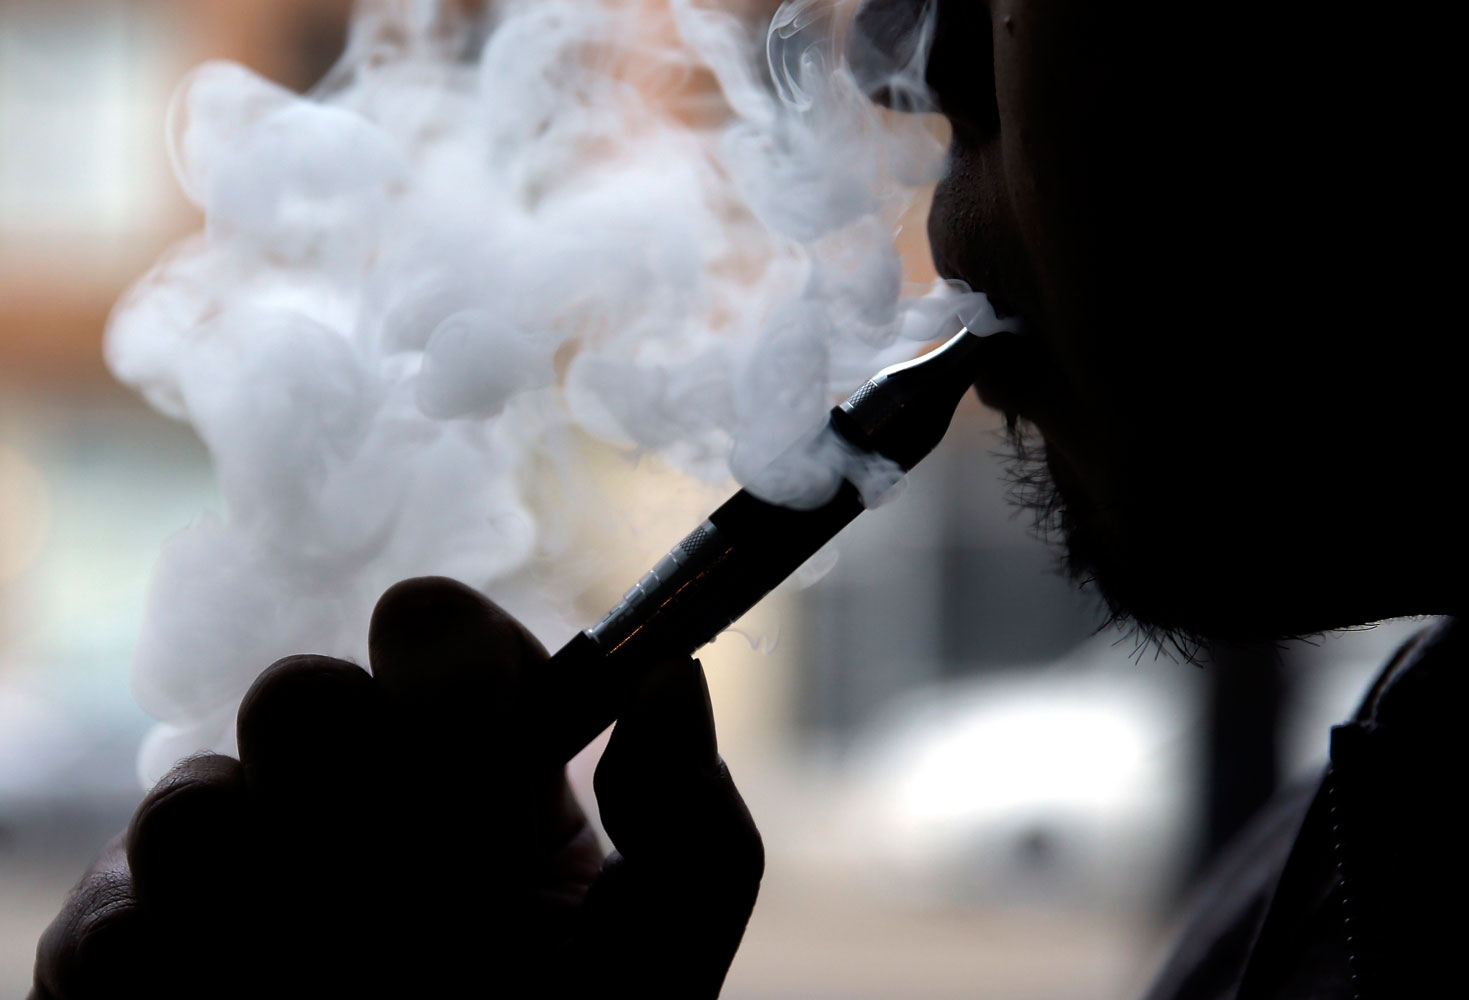 A patron demonstrates an e-cigarette at Vape store in Chicago, April 23, 2014.